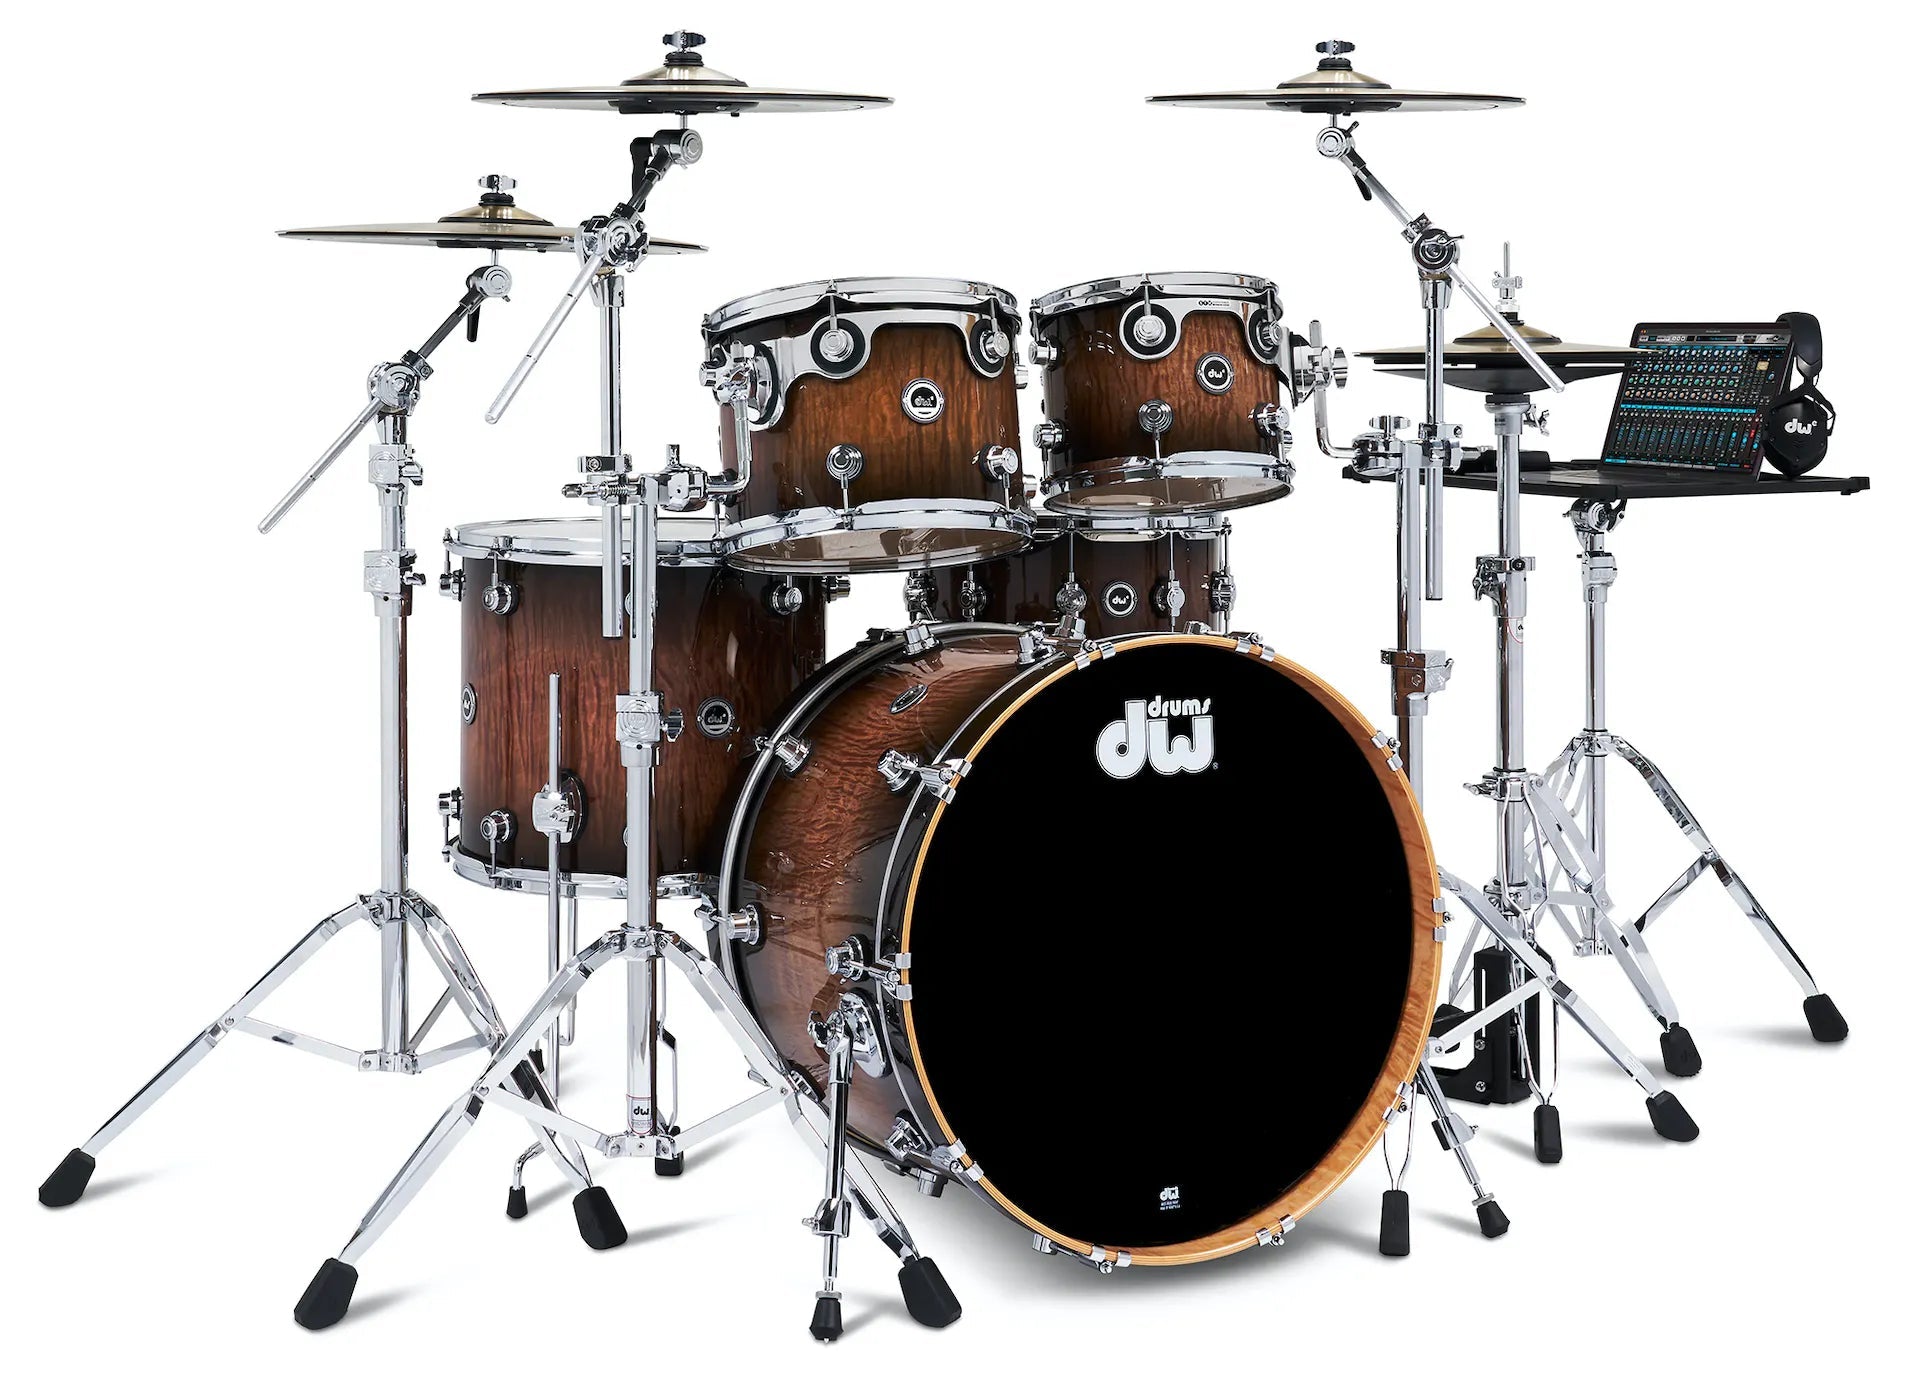 DWe Electronic 5pc Drum set with Cymbals and Hardware in Candy Black Burst over Curly Maple. Electronic Drums DW 